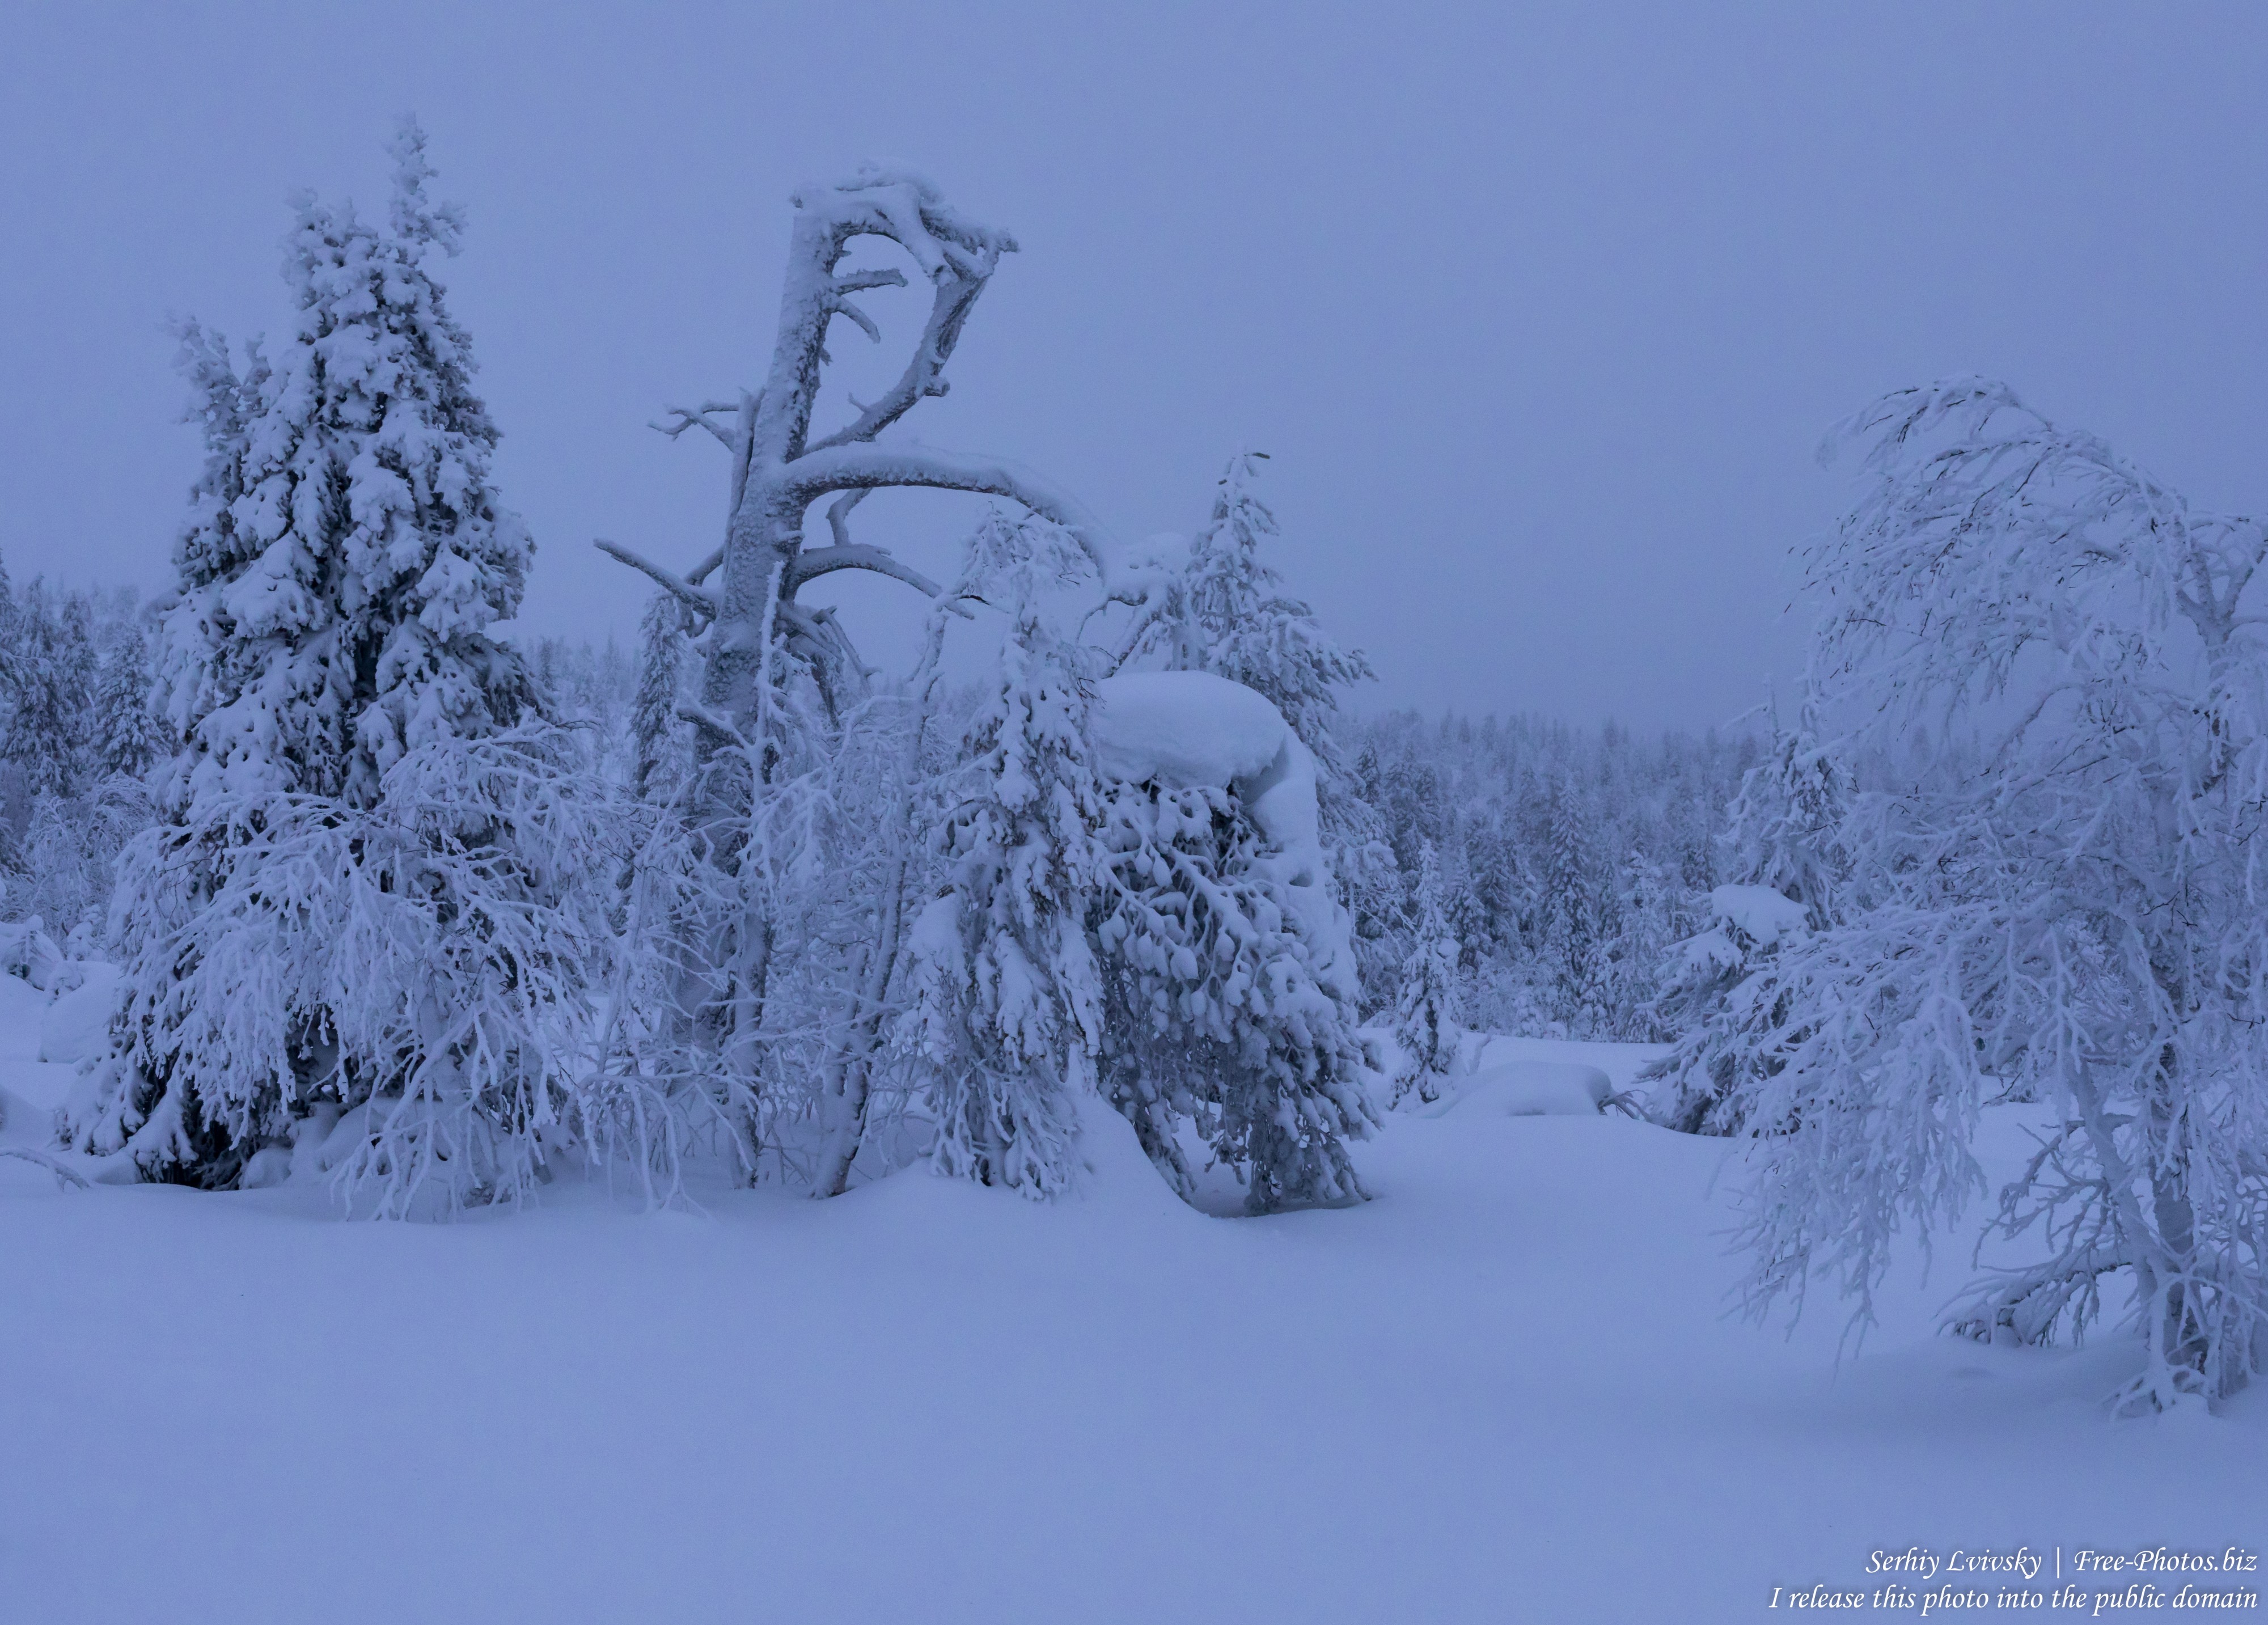 Riisitunturi, Finland, photographed in January 2020 by Serhiy Lvivsky, picture 23